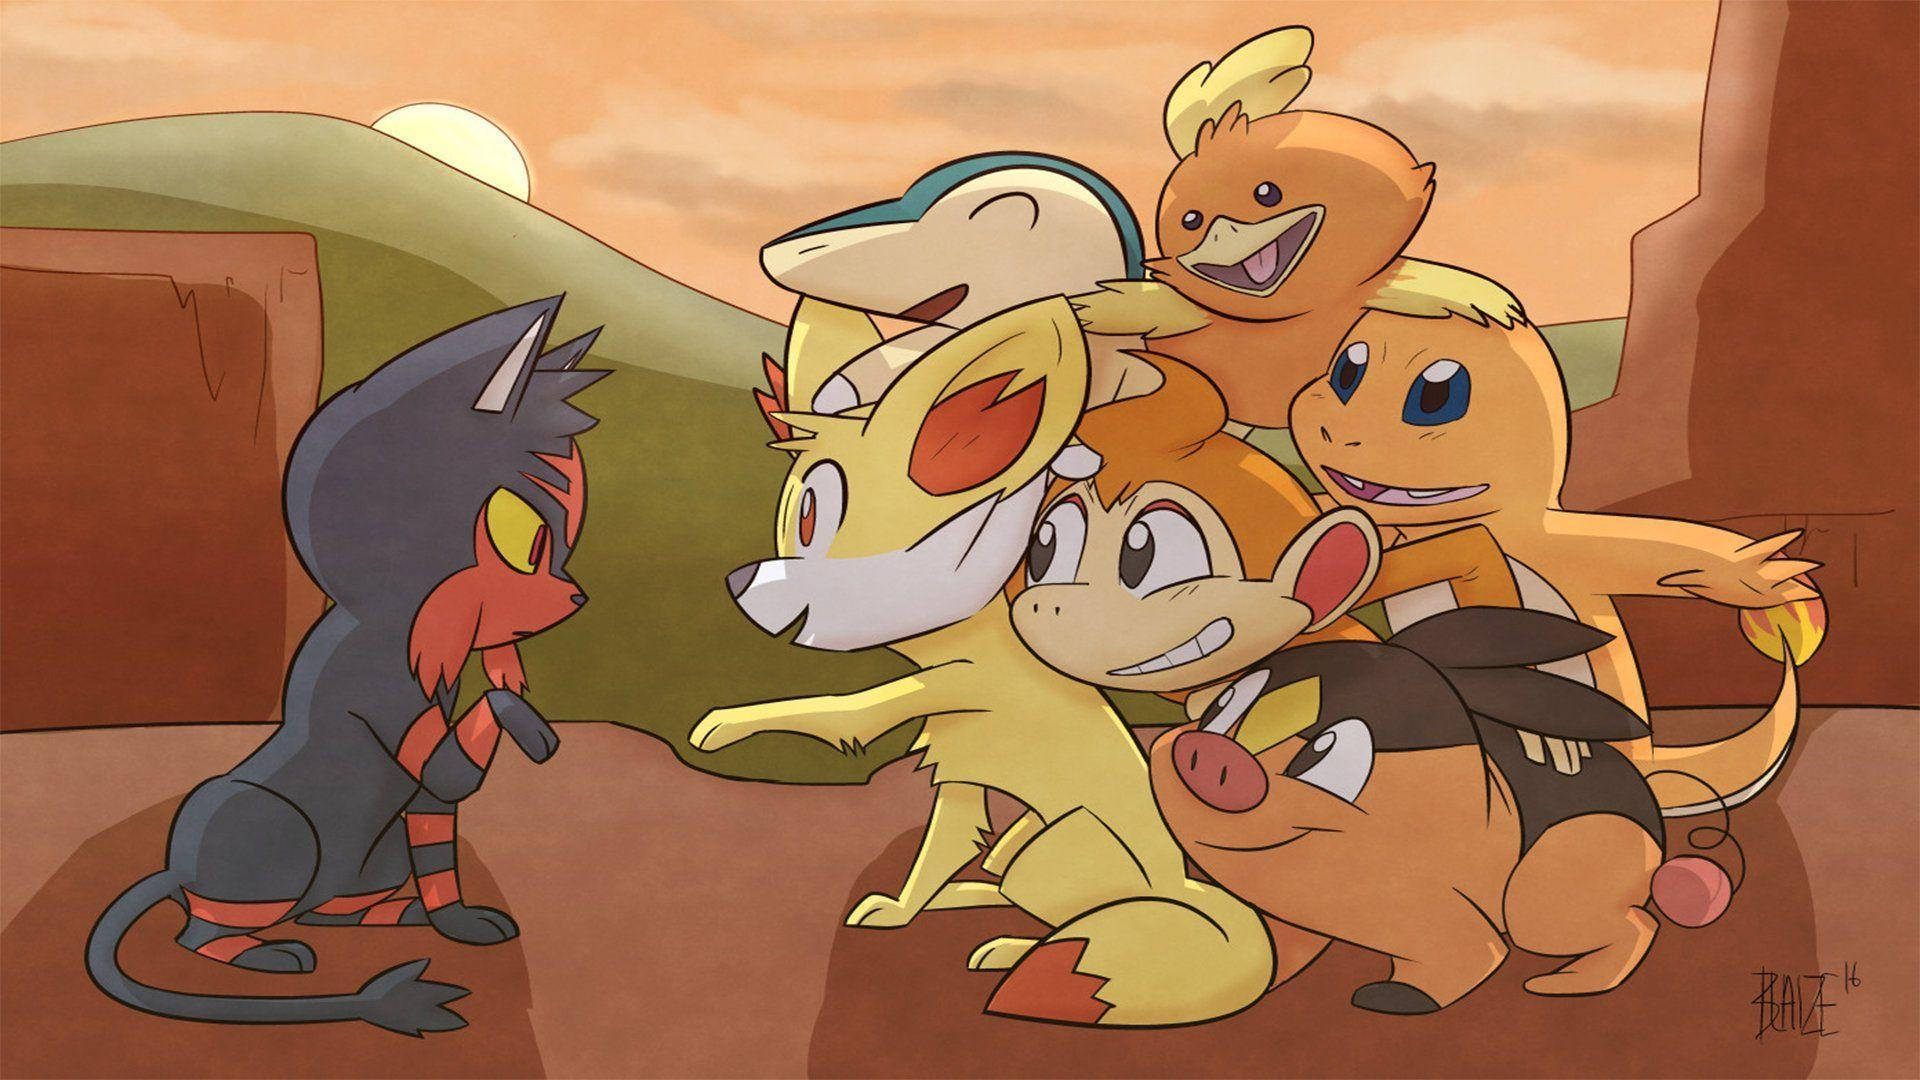 Download Chimchar With Litten And Other Pokemon Wallpaper 